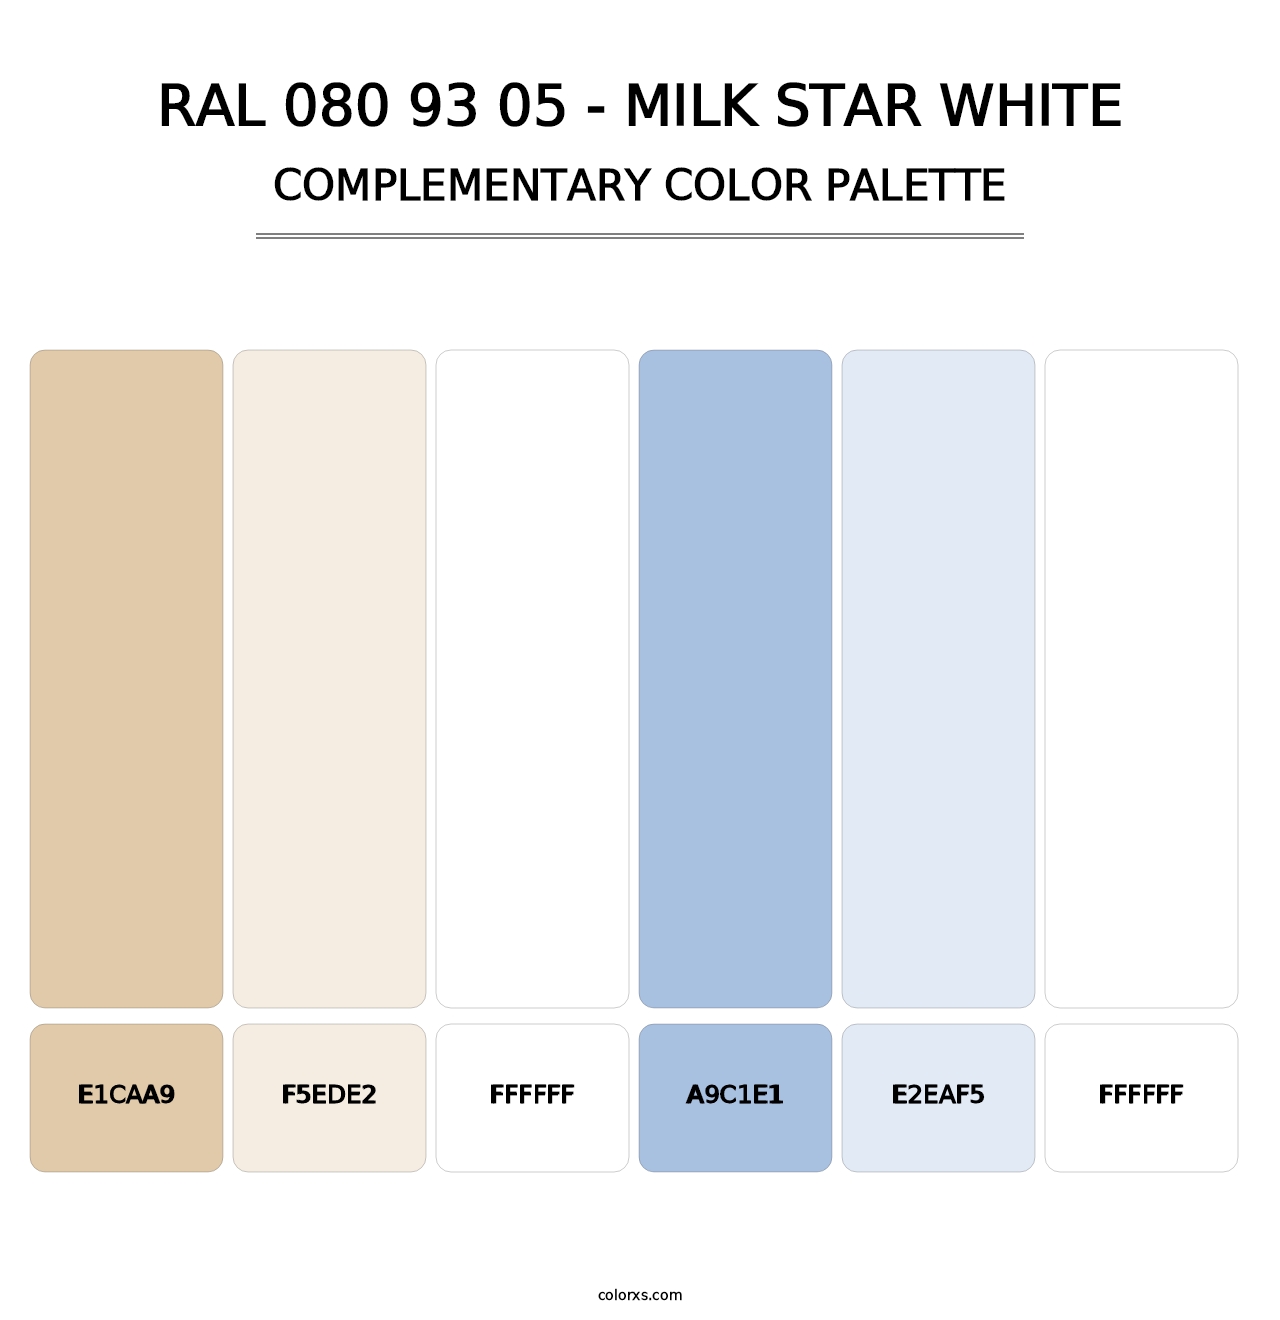 RAL 080 93 05 - Milk Star White - Complementary Color Palette